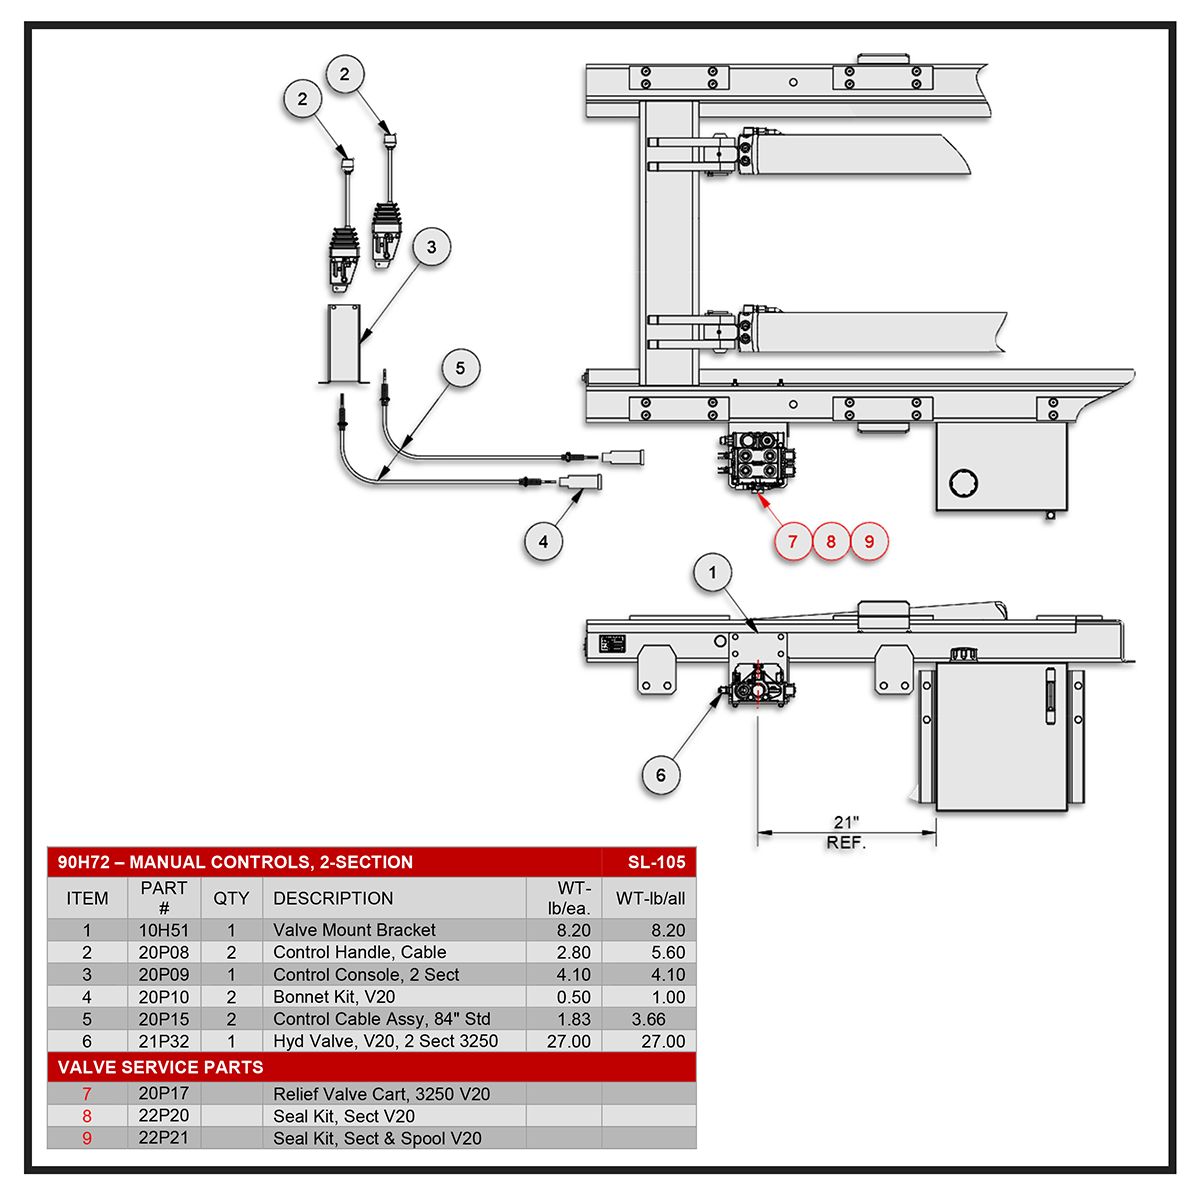 Swaploader 100 Series Two-Section Manual Control Assembly Diagram